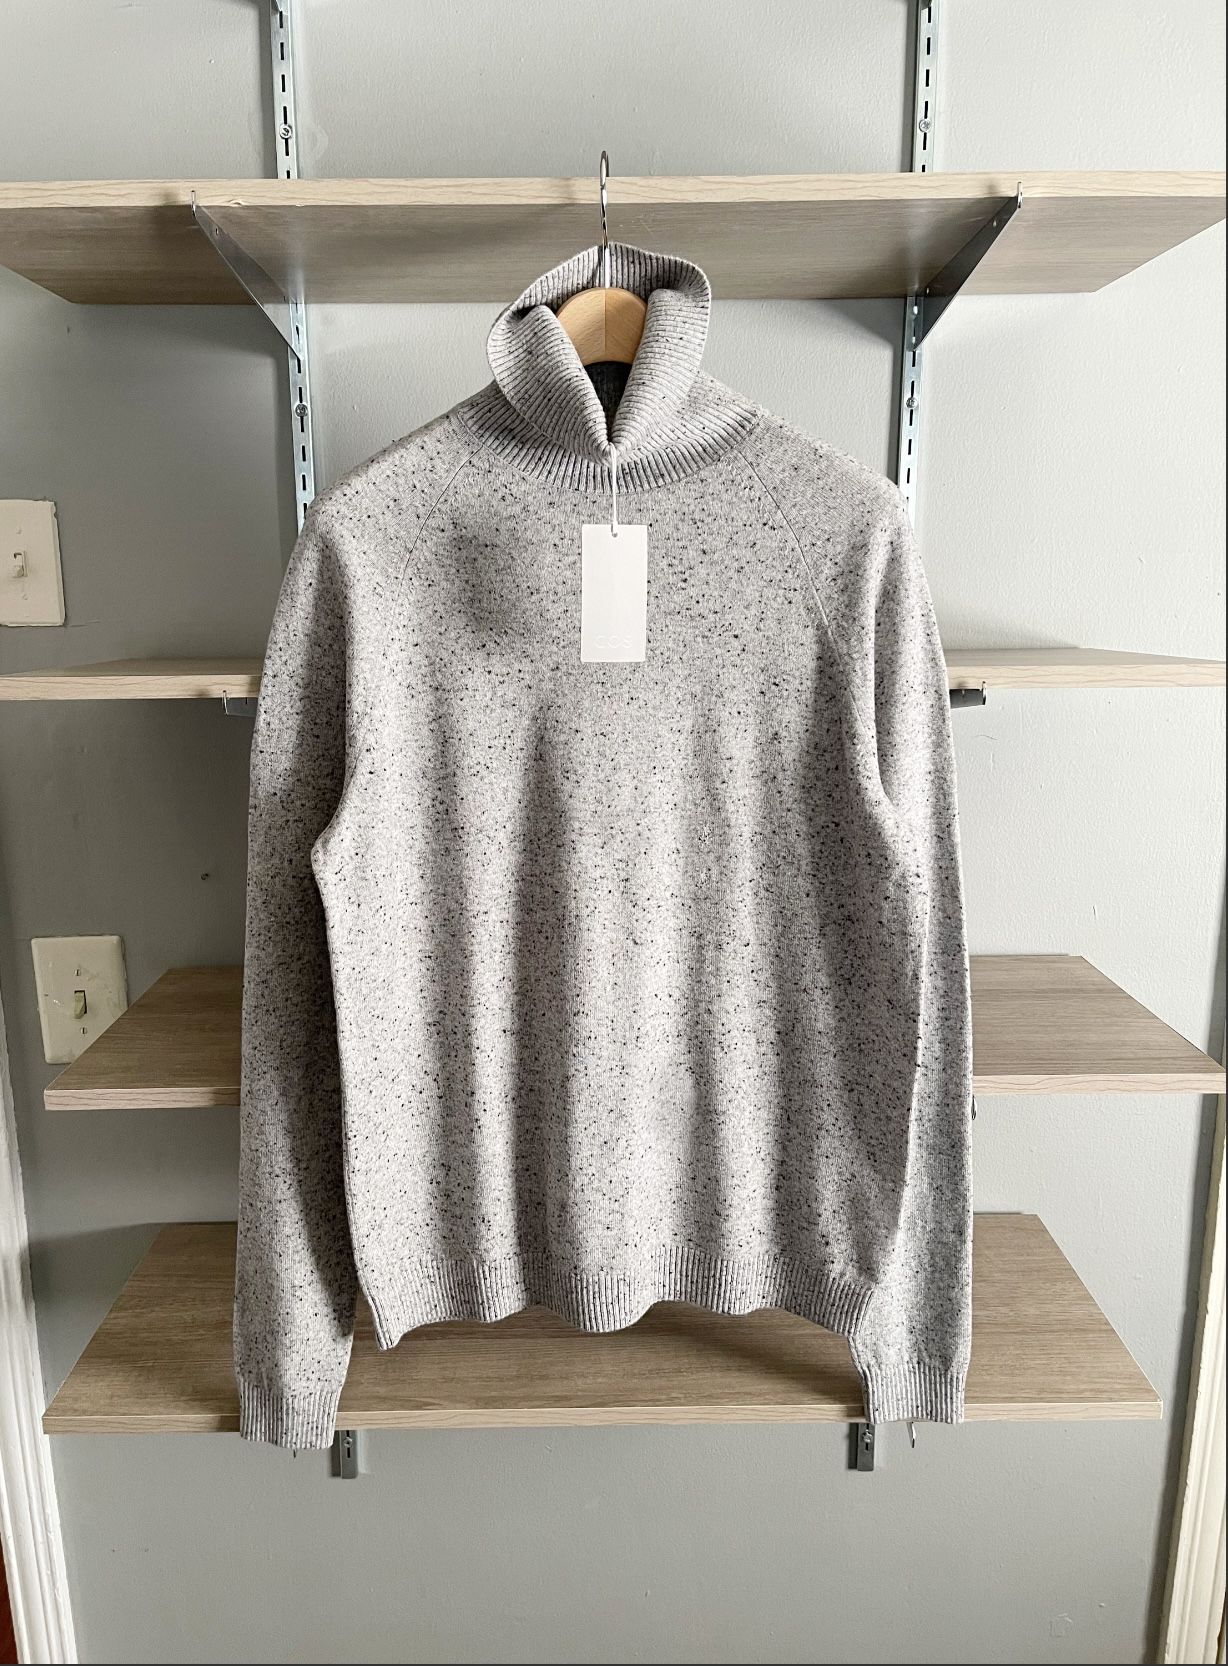 New! Womens COS Turtleneck sweater Retail $100 Size Small. Super comfy and cozy! Thick roll neck and ribbed cuffs for structure. Very comfortable regu